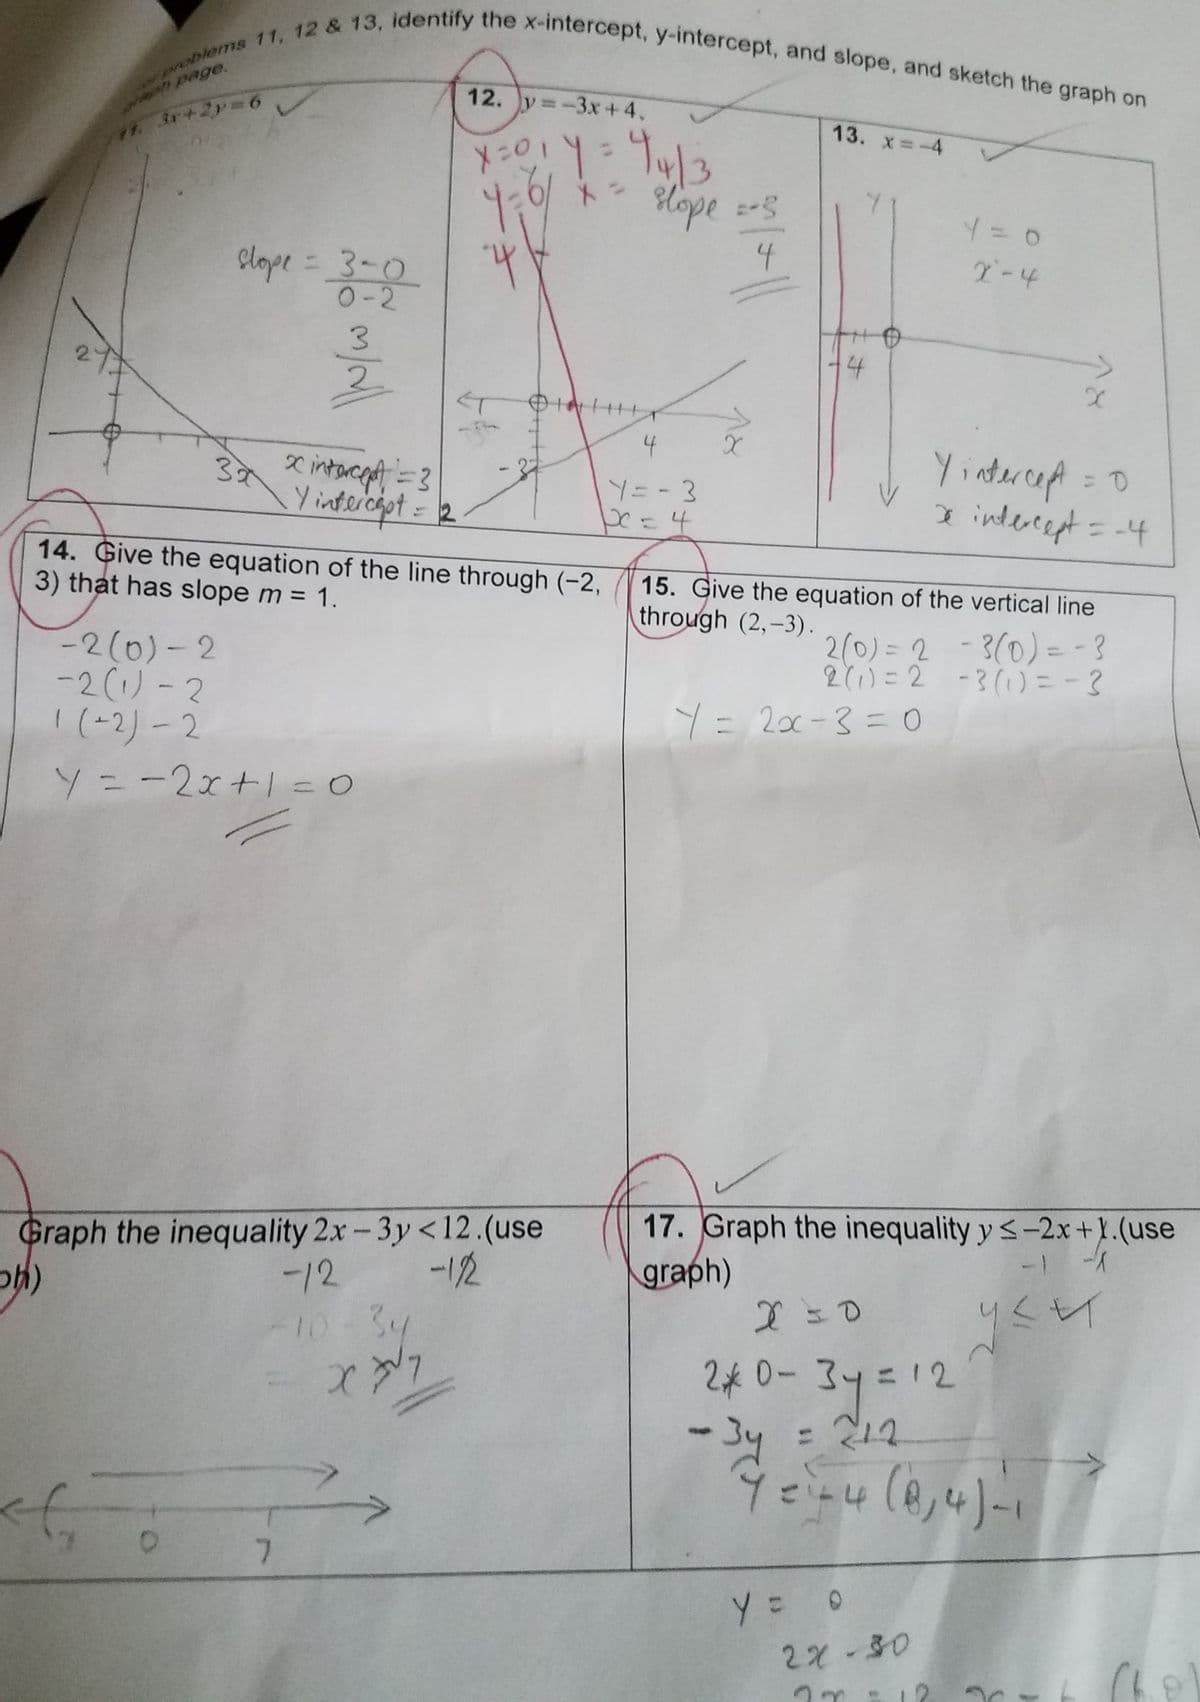 (V
problems 11, 12 & 13, identify the x-intercept, y-intercept, and slope, and sketch the graph on
rach page.
71. 3x+2y=6
slope = 3-0
0-2
<f
30
O
m/all
-2(0)-2
-2 (1)-2
1(-2)-2
Y ==2x+1=0
x intercept = 3
Y intercept = 12
14.
Give the equation of the line through (-2,
3) that has slope m = 1.
7
X = 0 1 Y = 44/3
4:0/
X
4
Graph the inequality 2x-3y <12.(use
-12
sh)
-122
10-34
X
DINH
slope =-5
4
4
Y = - 3
pe = 4
X
4
Y = 2x-3 = 0
Y = 0
X-4
15. Give the equation of the vertical line
through (2,-3).
2(0) = 2 - 3(0) = -3
2 (1)=2 - 3(1) = -3
Y = 0
x
Yintercept = 0
2 intercept = -4
17. Graph the inequality y ≤-2x+1.(use
graph)
S
уси
x=0
20-34 = 12
-3y = 242
Y = 1+4 (0,4) -1
2x-30